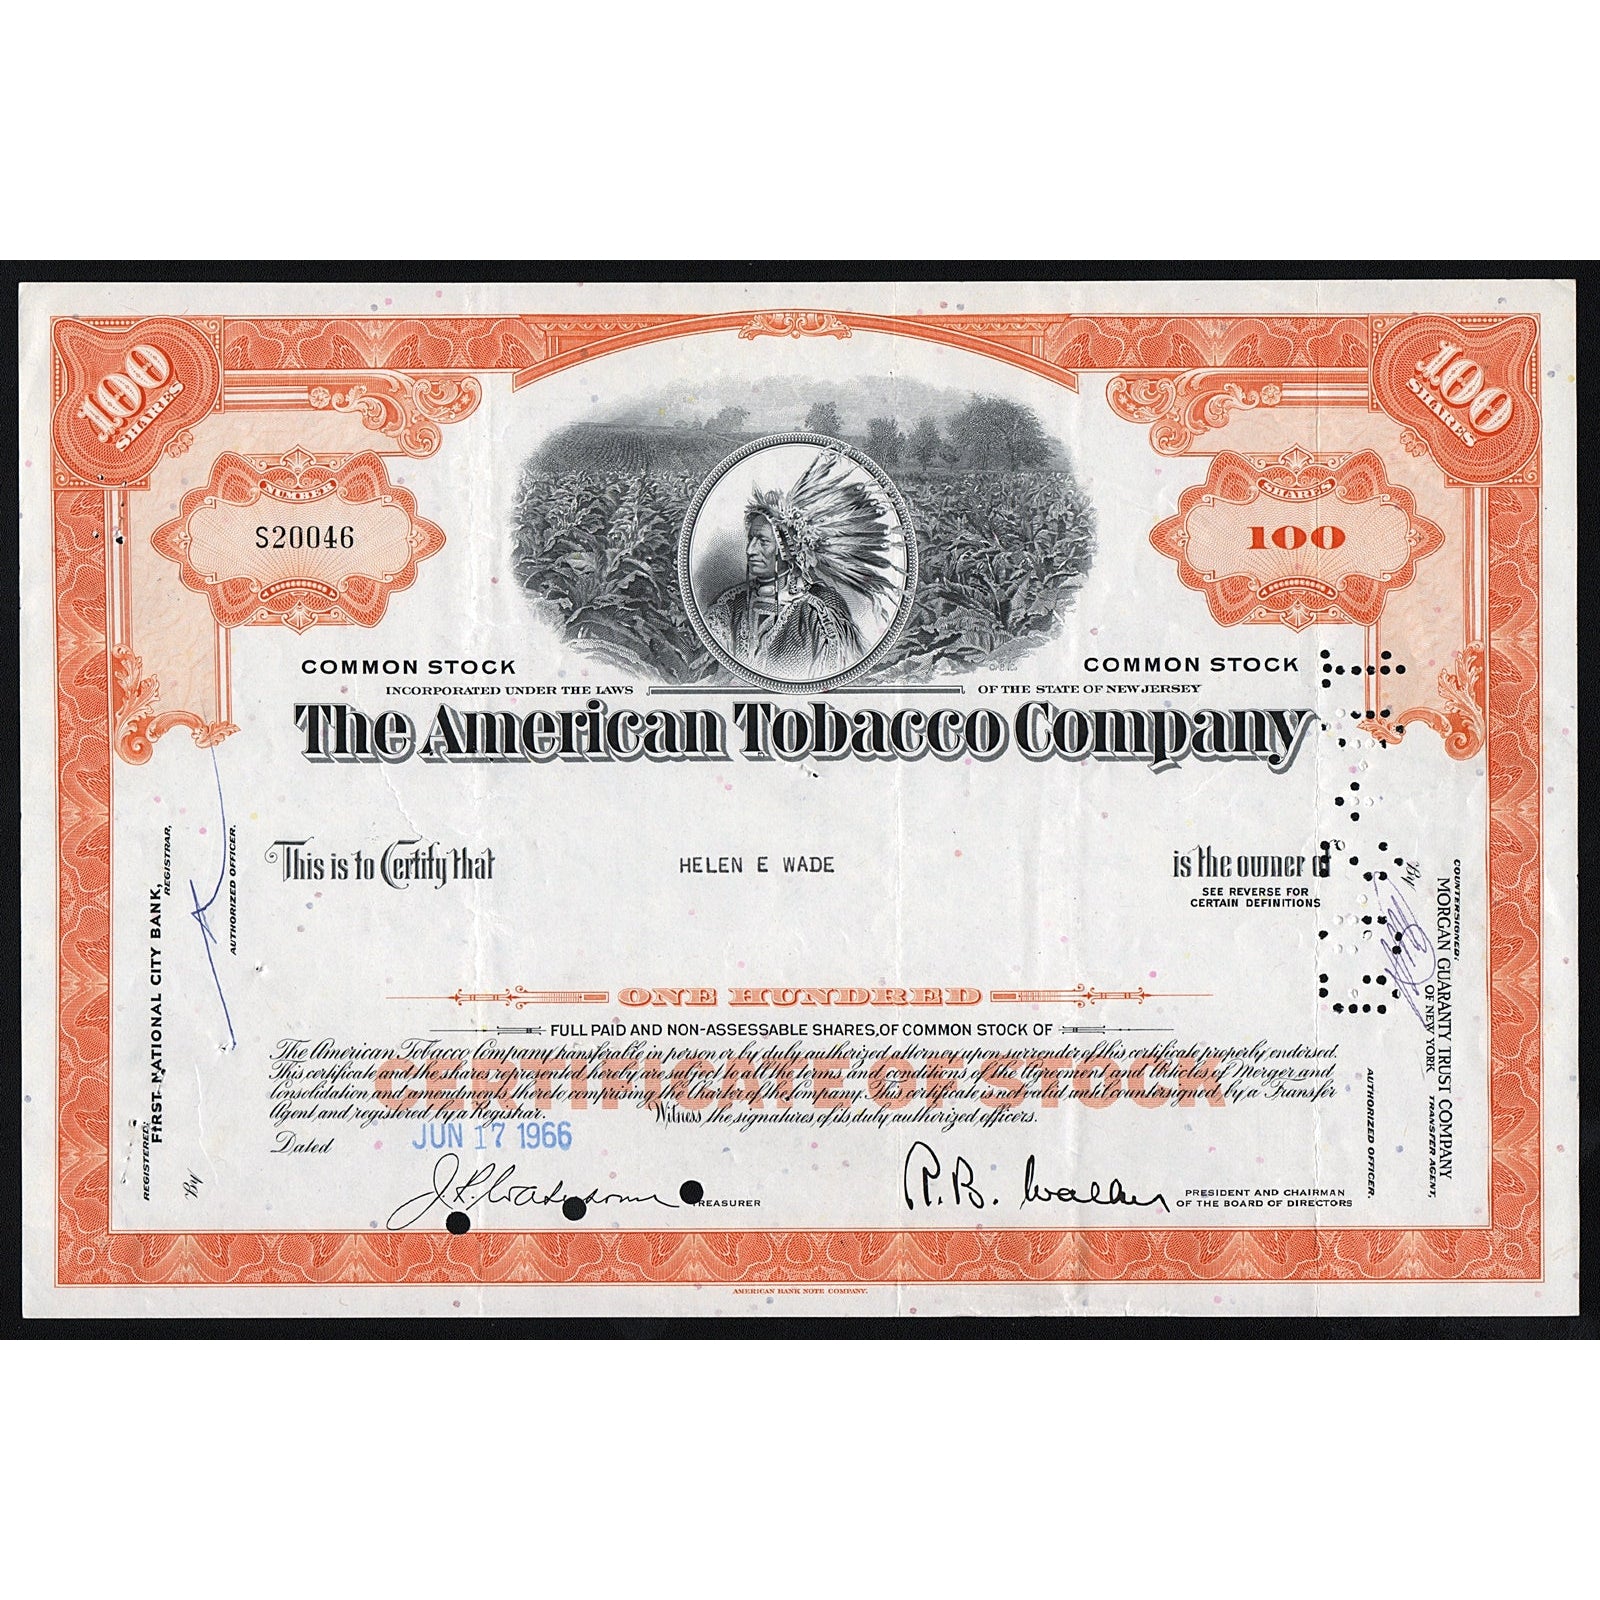 Issued by the American Tobacco Company